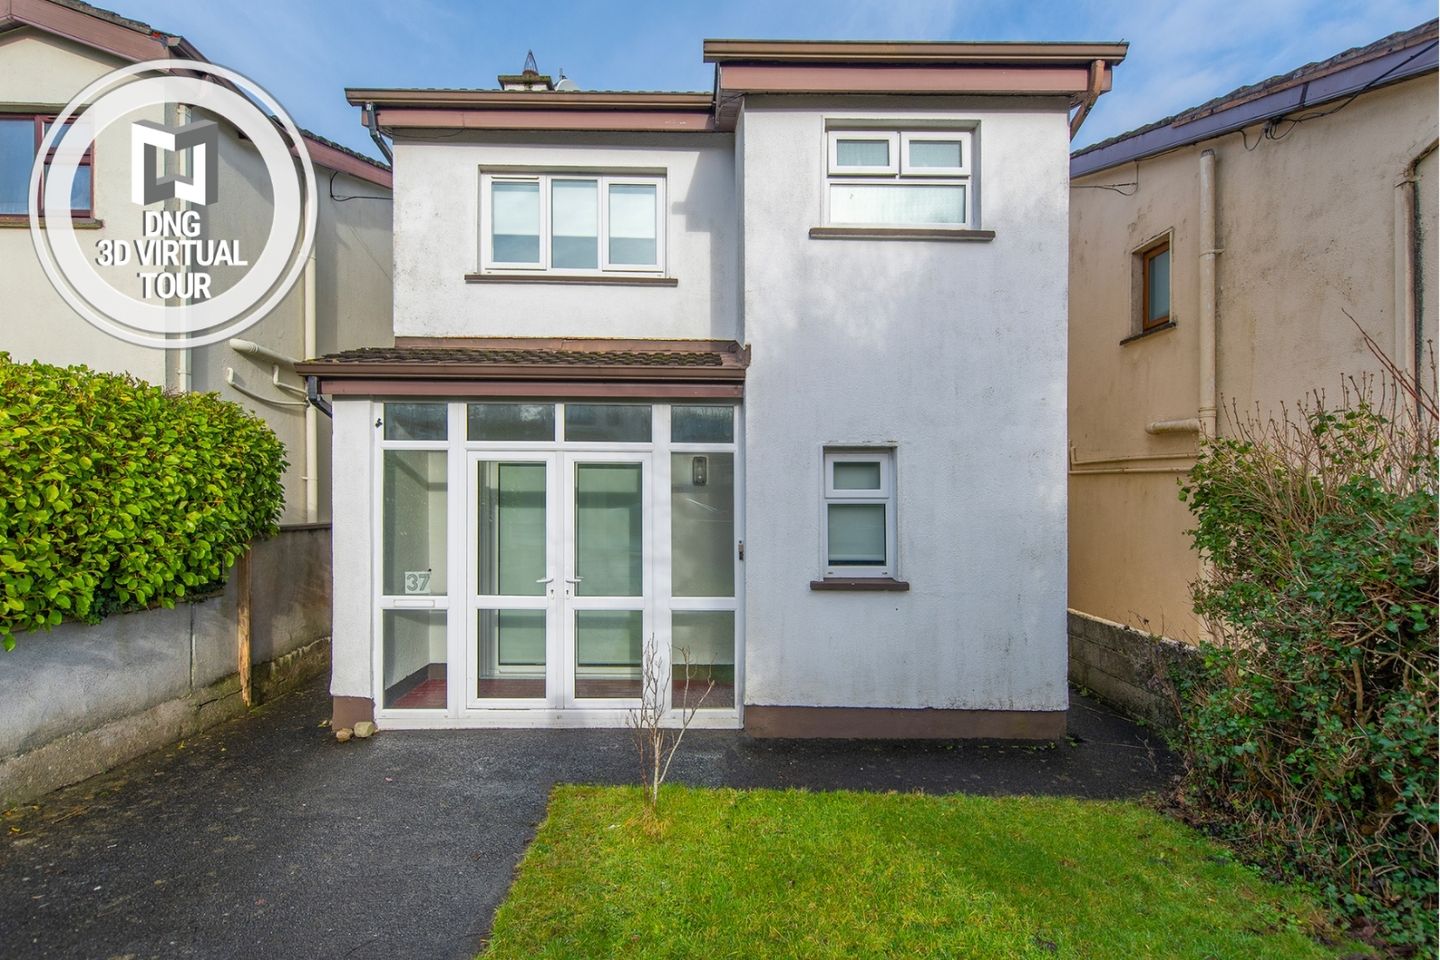 37 Friars Hill, Bishop O'Donnell Road, Galway City, H91X21V, Galway City Centre